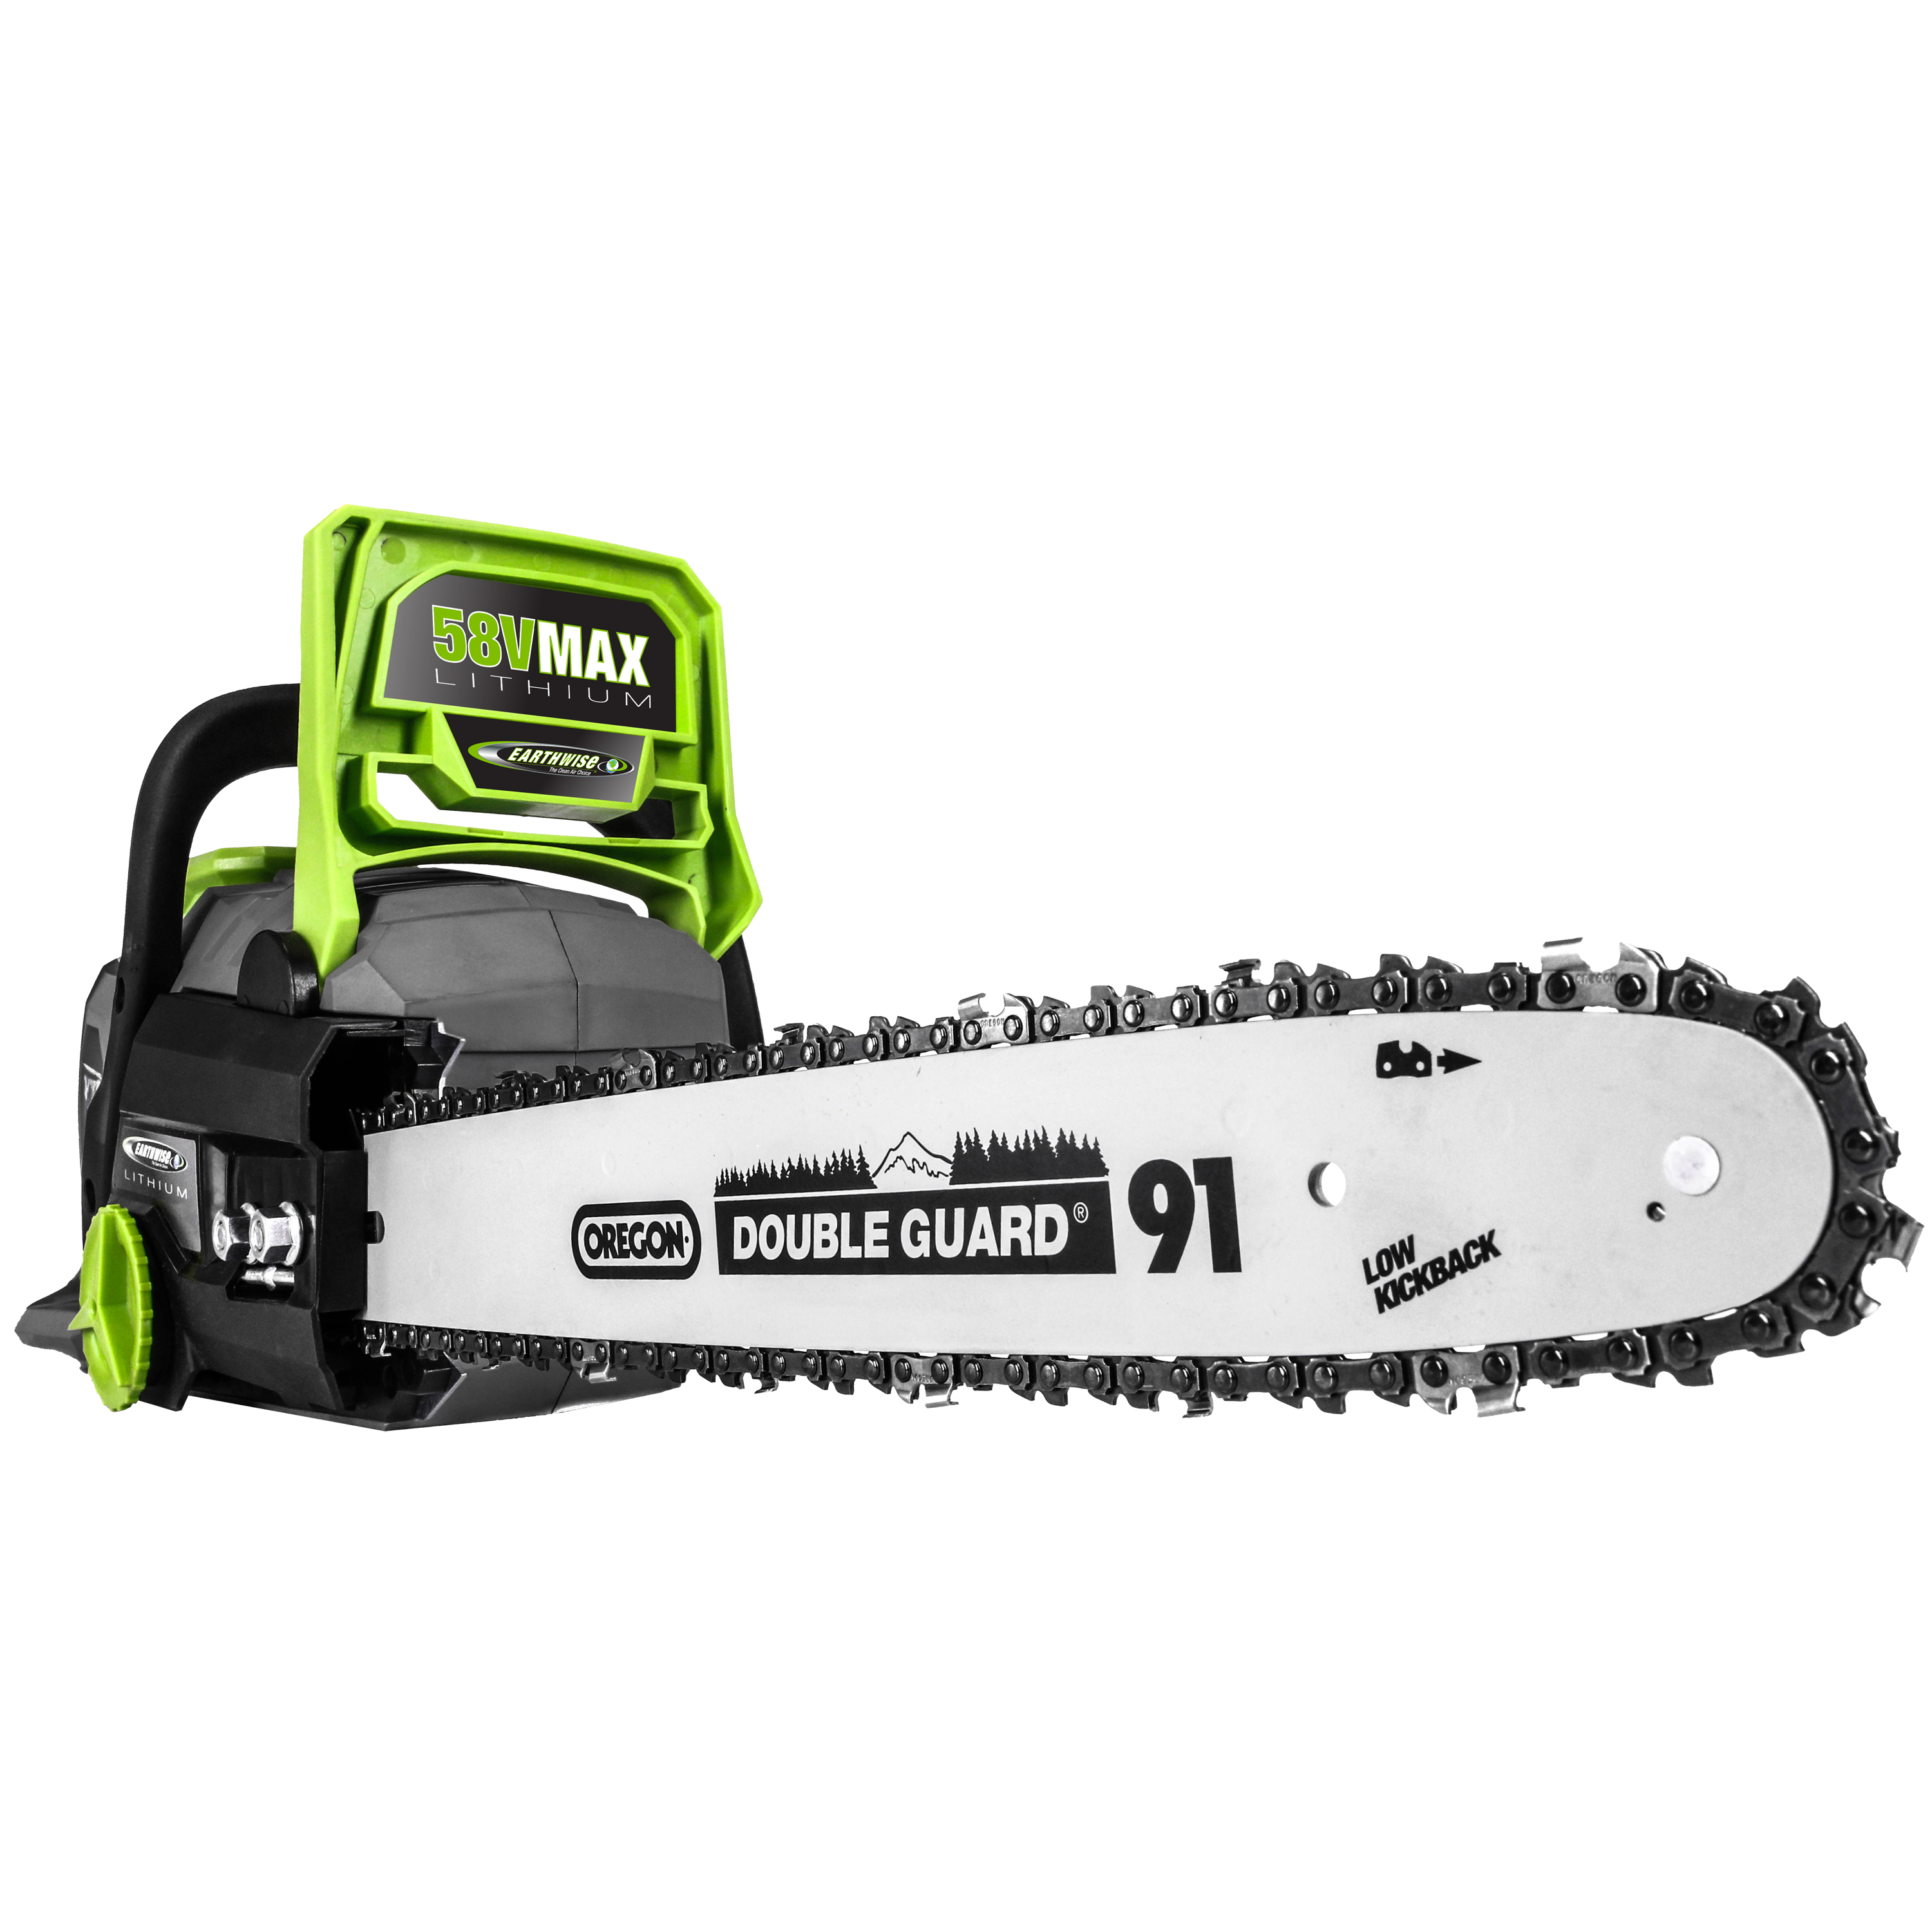 Earthwise LCS35814 14" 58-Volt Cordless Chainsaw, Brushless Motor (2Ah Battery and Charger Included) - image 2 of 5